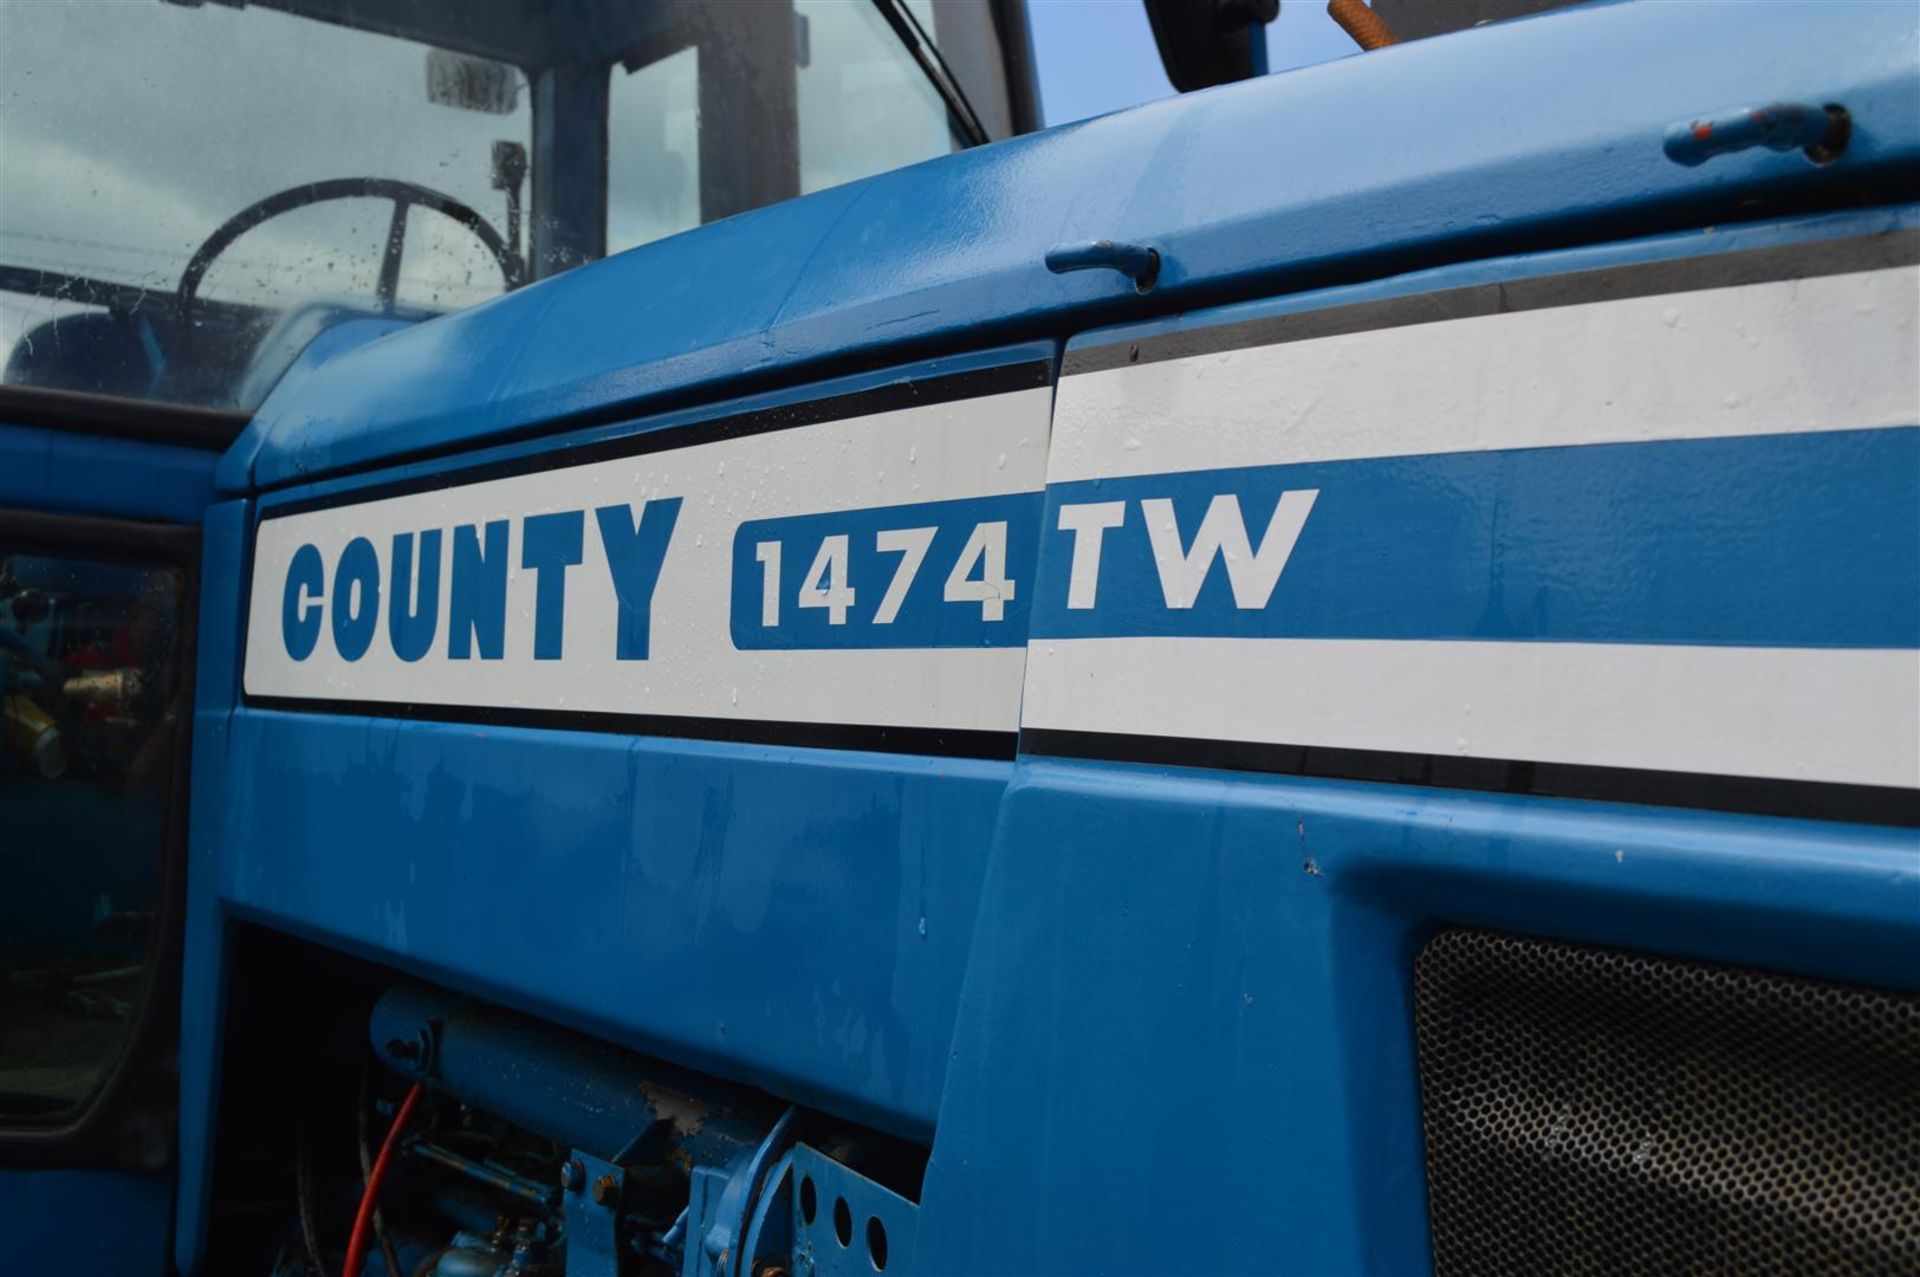 1980 County 1474 TW 4wd 6cylinder TRACTOR Reg. No. 80WWW320 Serial No. 41253904766 The 1474 was - Image 8 of 14